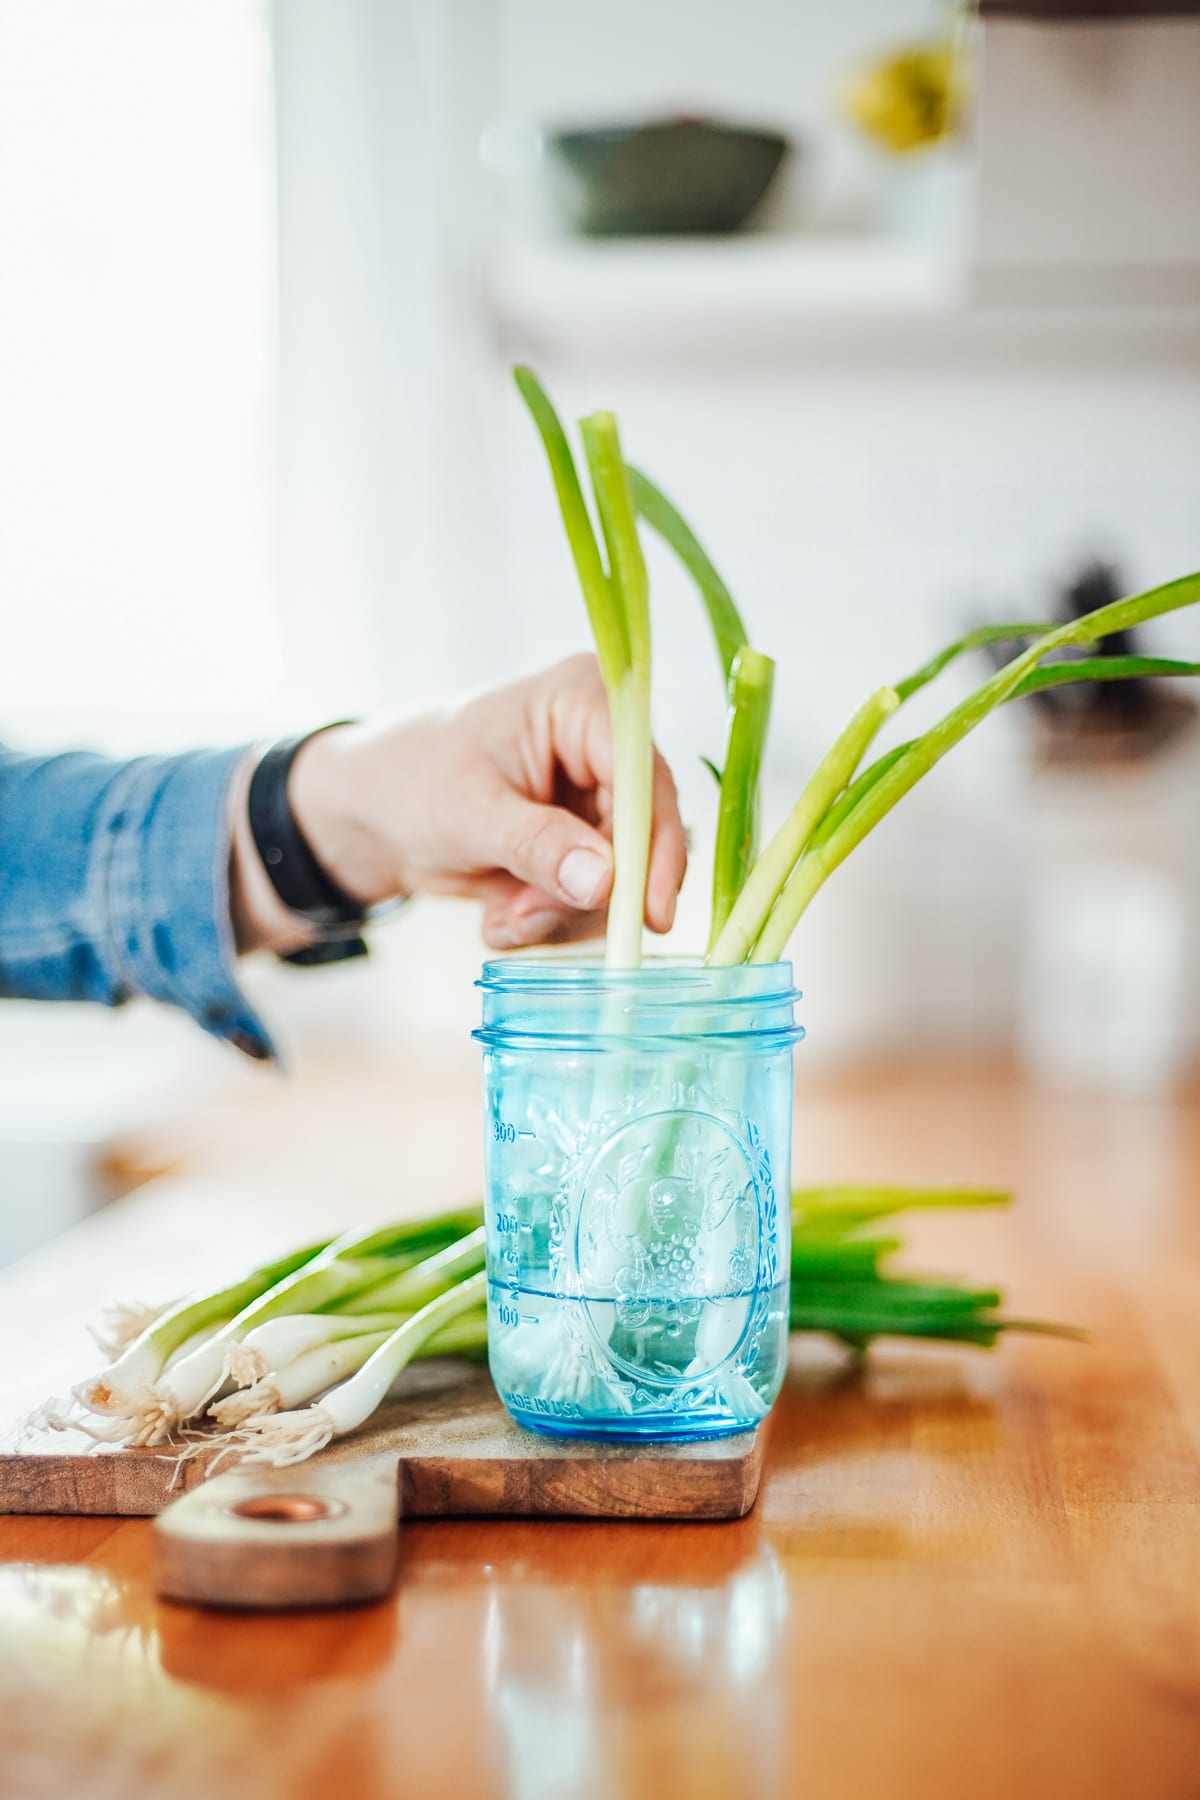 Can Slimy Green Onions Make You Sick